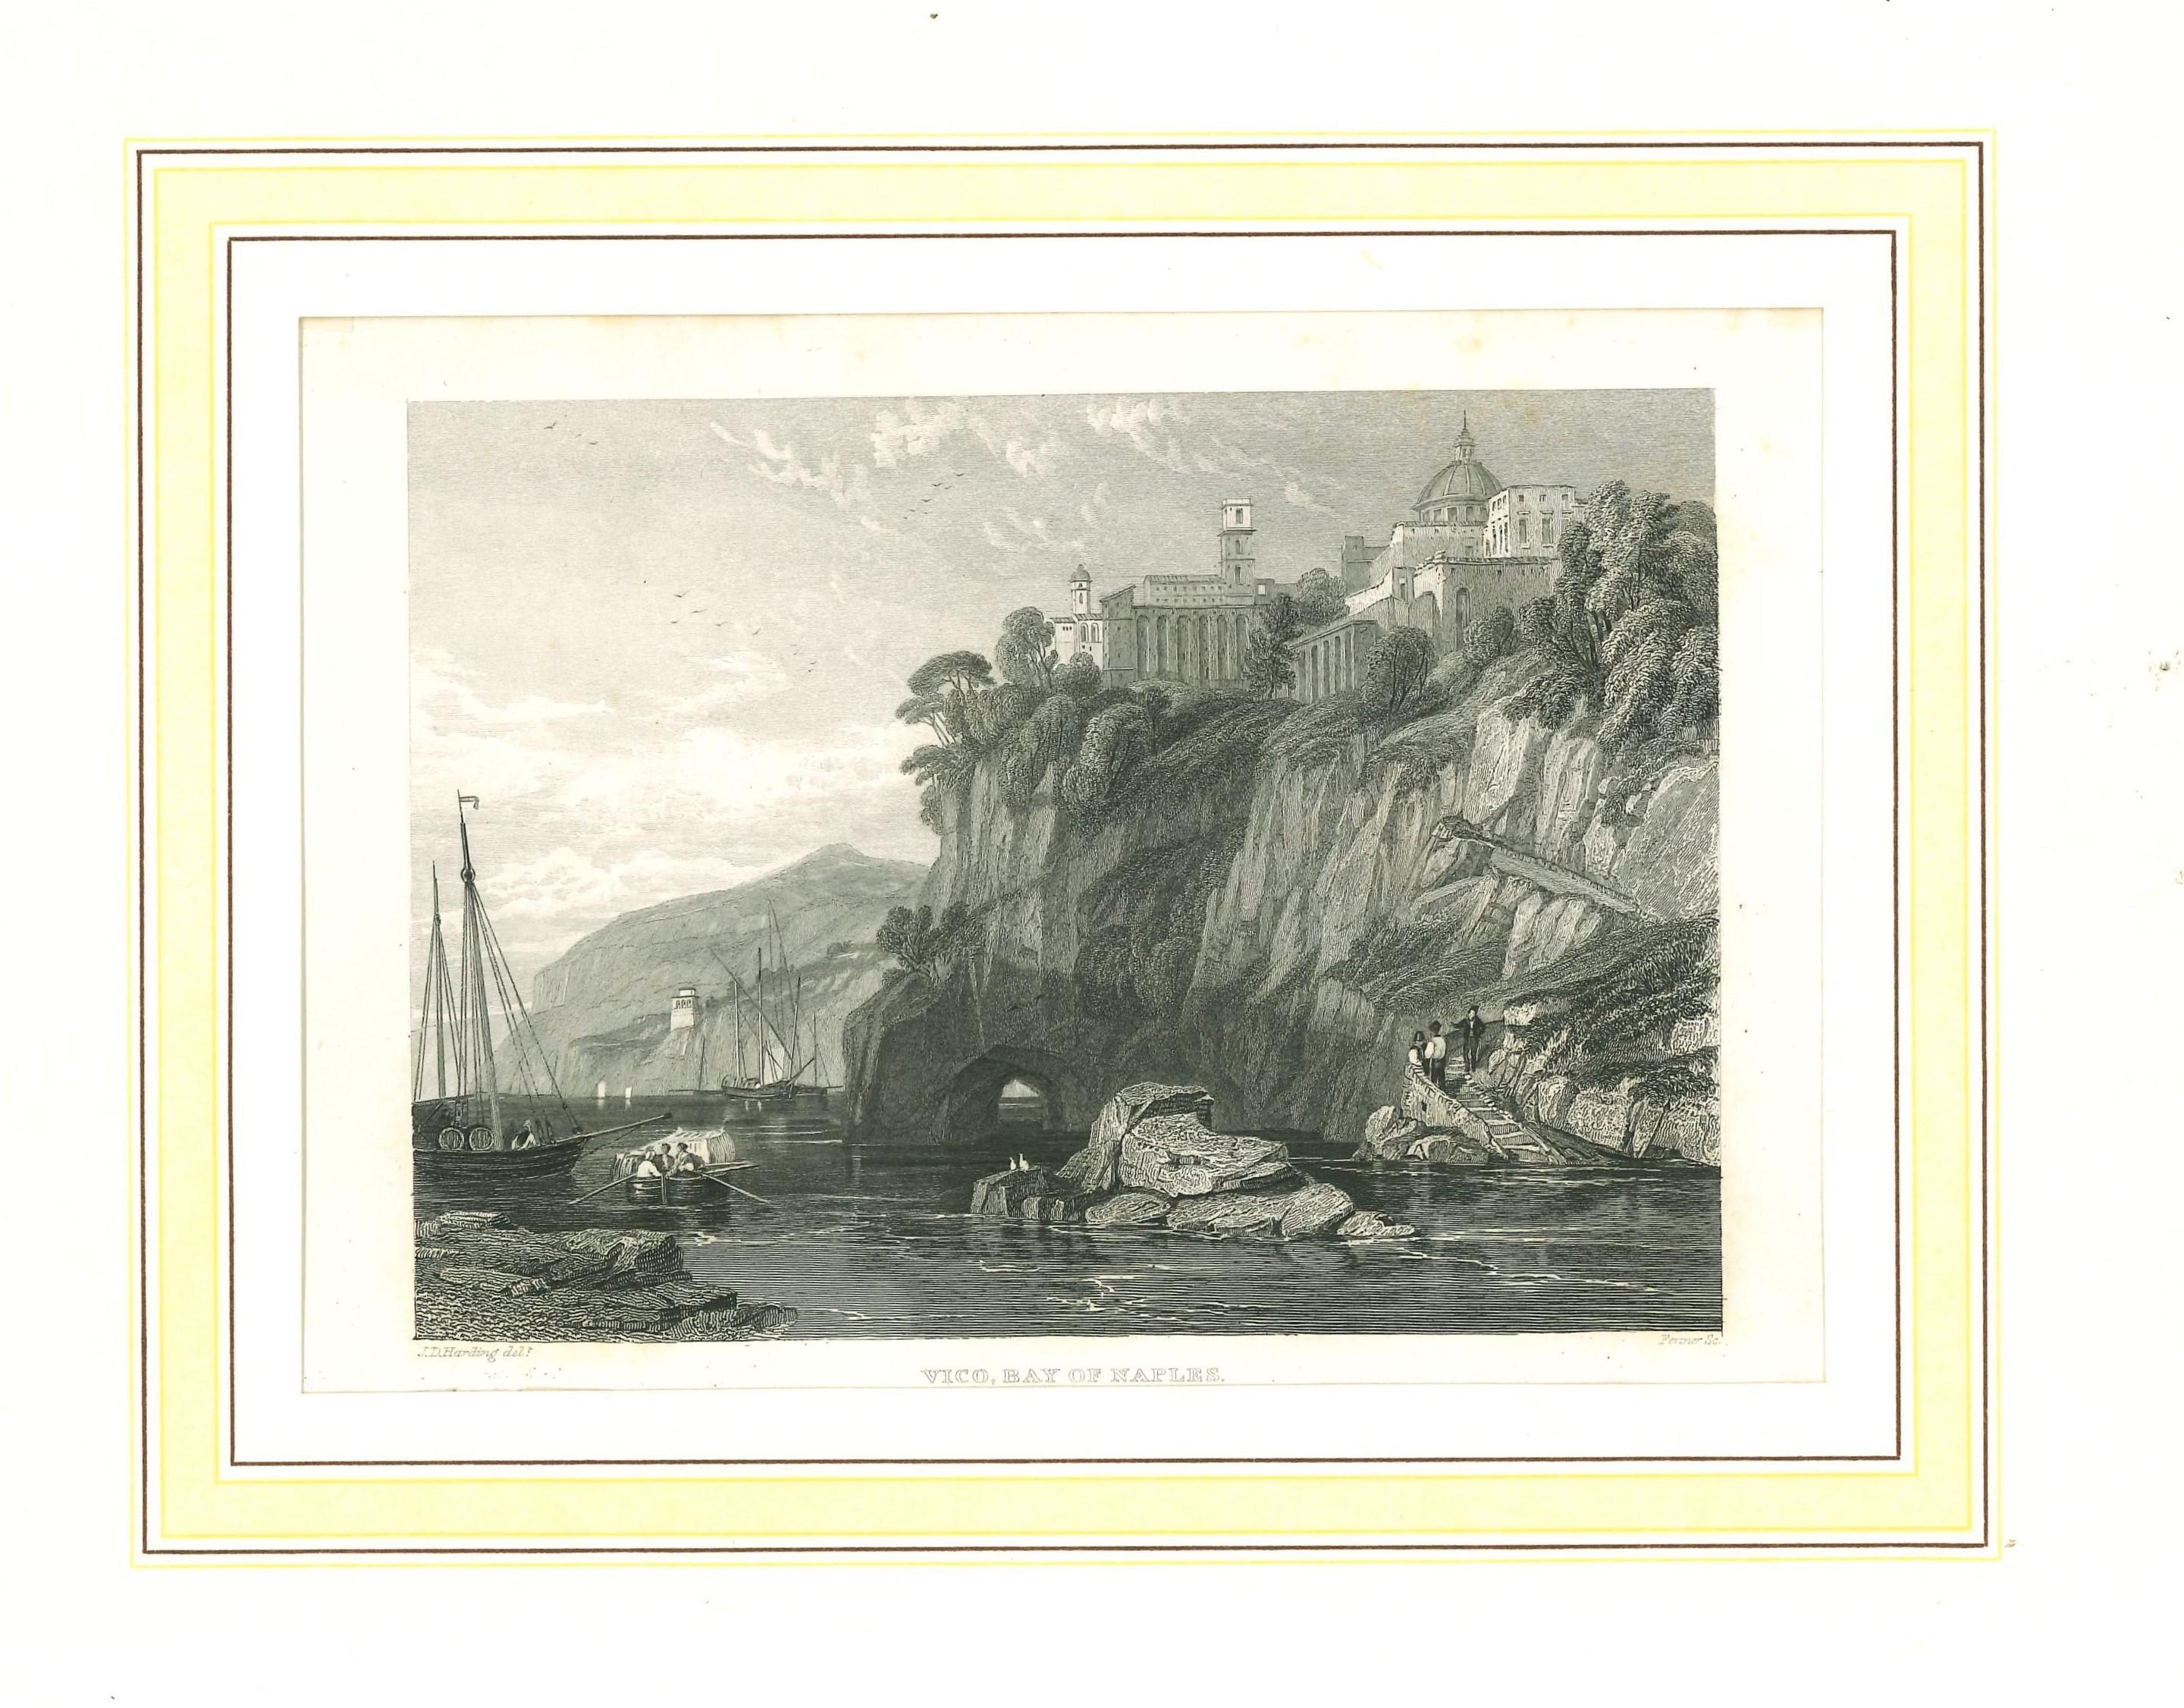 Unknown Landscape Print - Ancient View of the Bay of Naples - Original Lithograph - Mid-19th Century